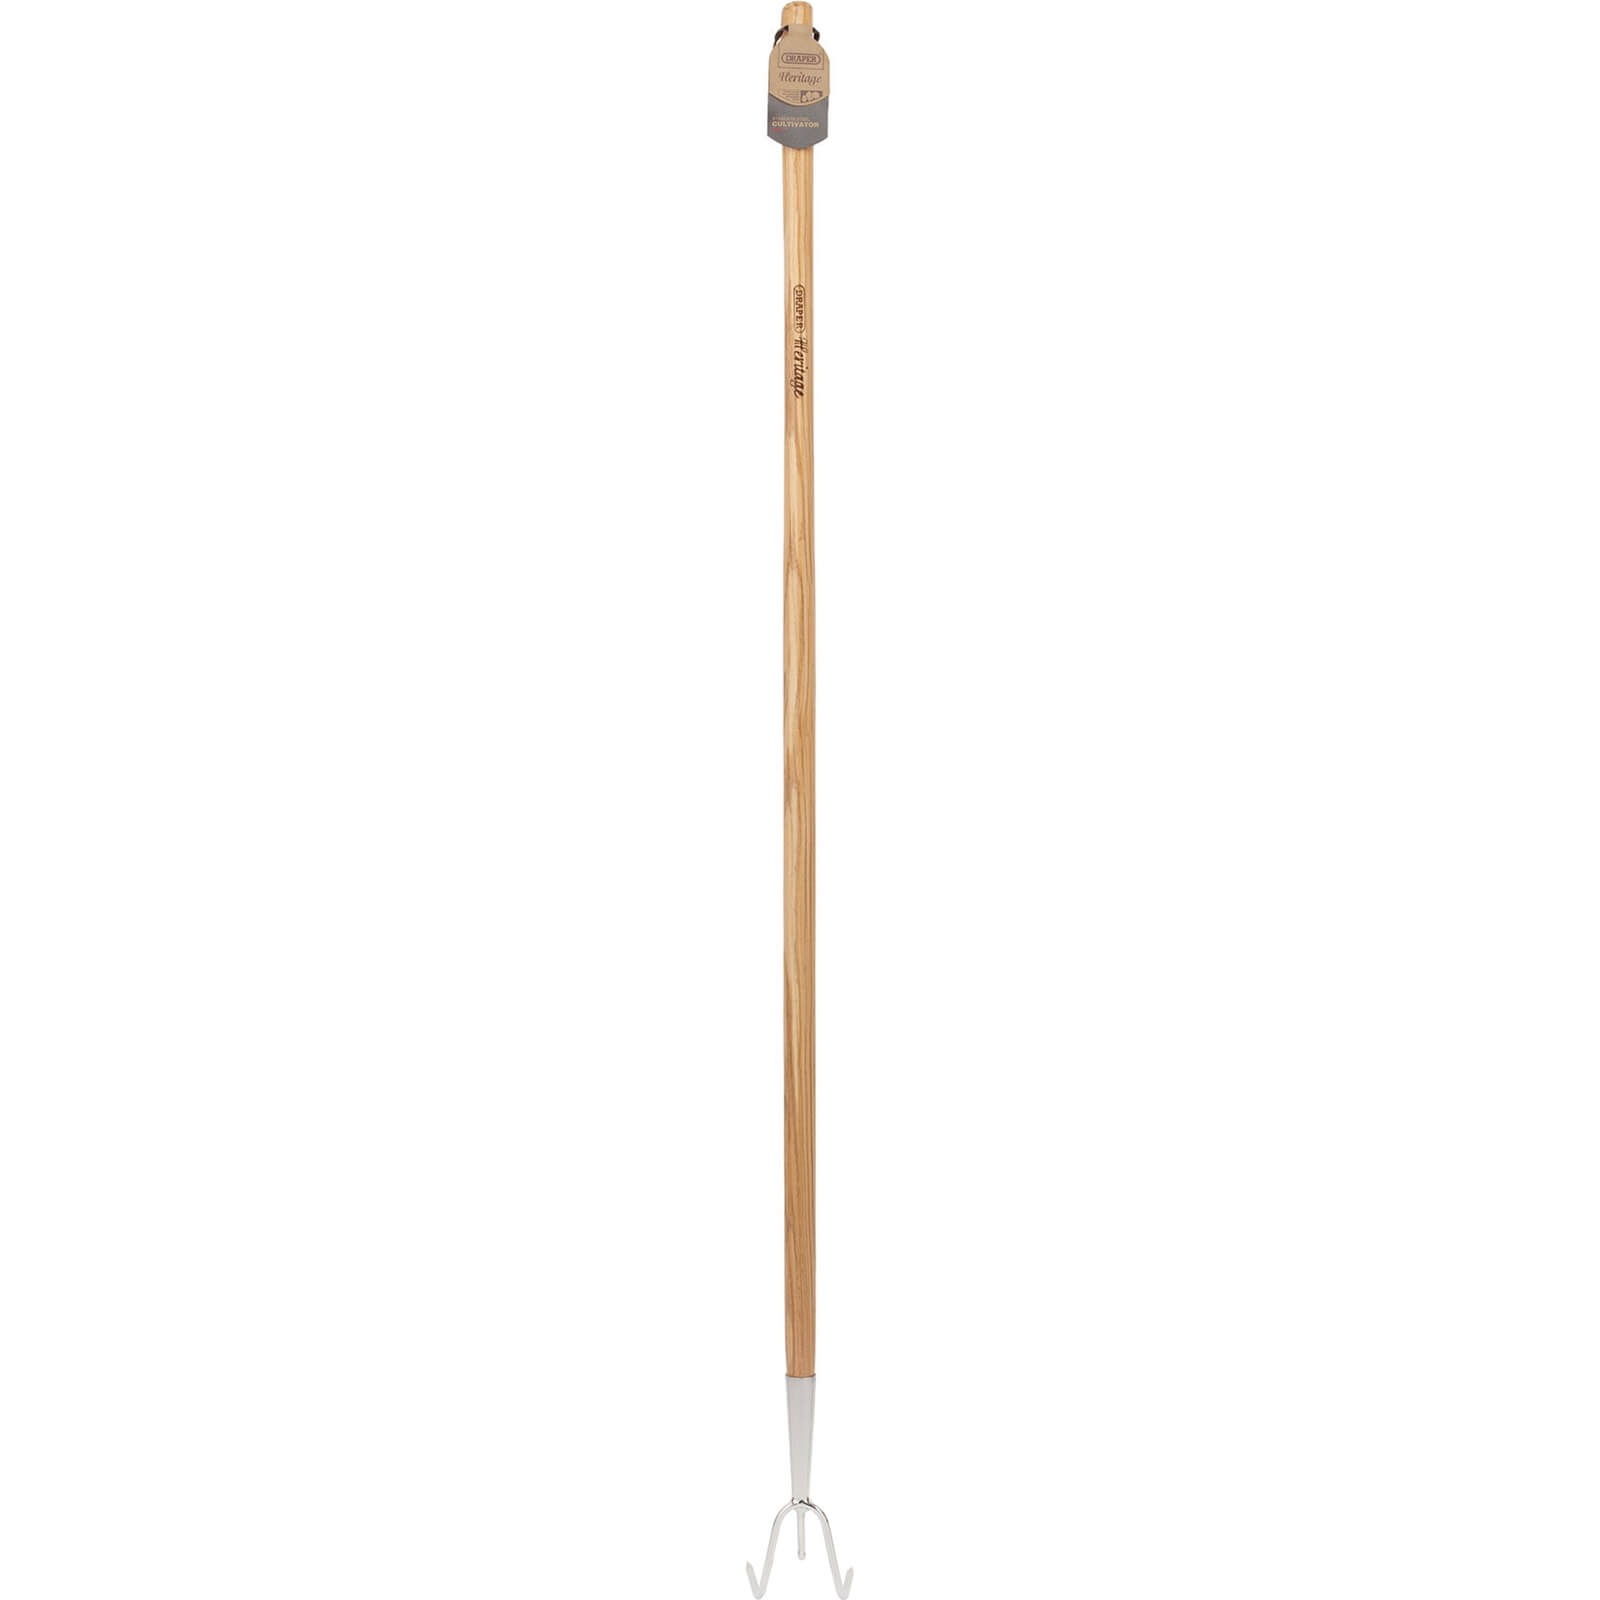 Photo of Draper Heritage Ash Handle 3 Prong Cultivator